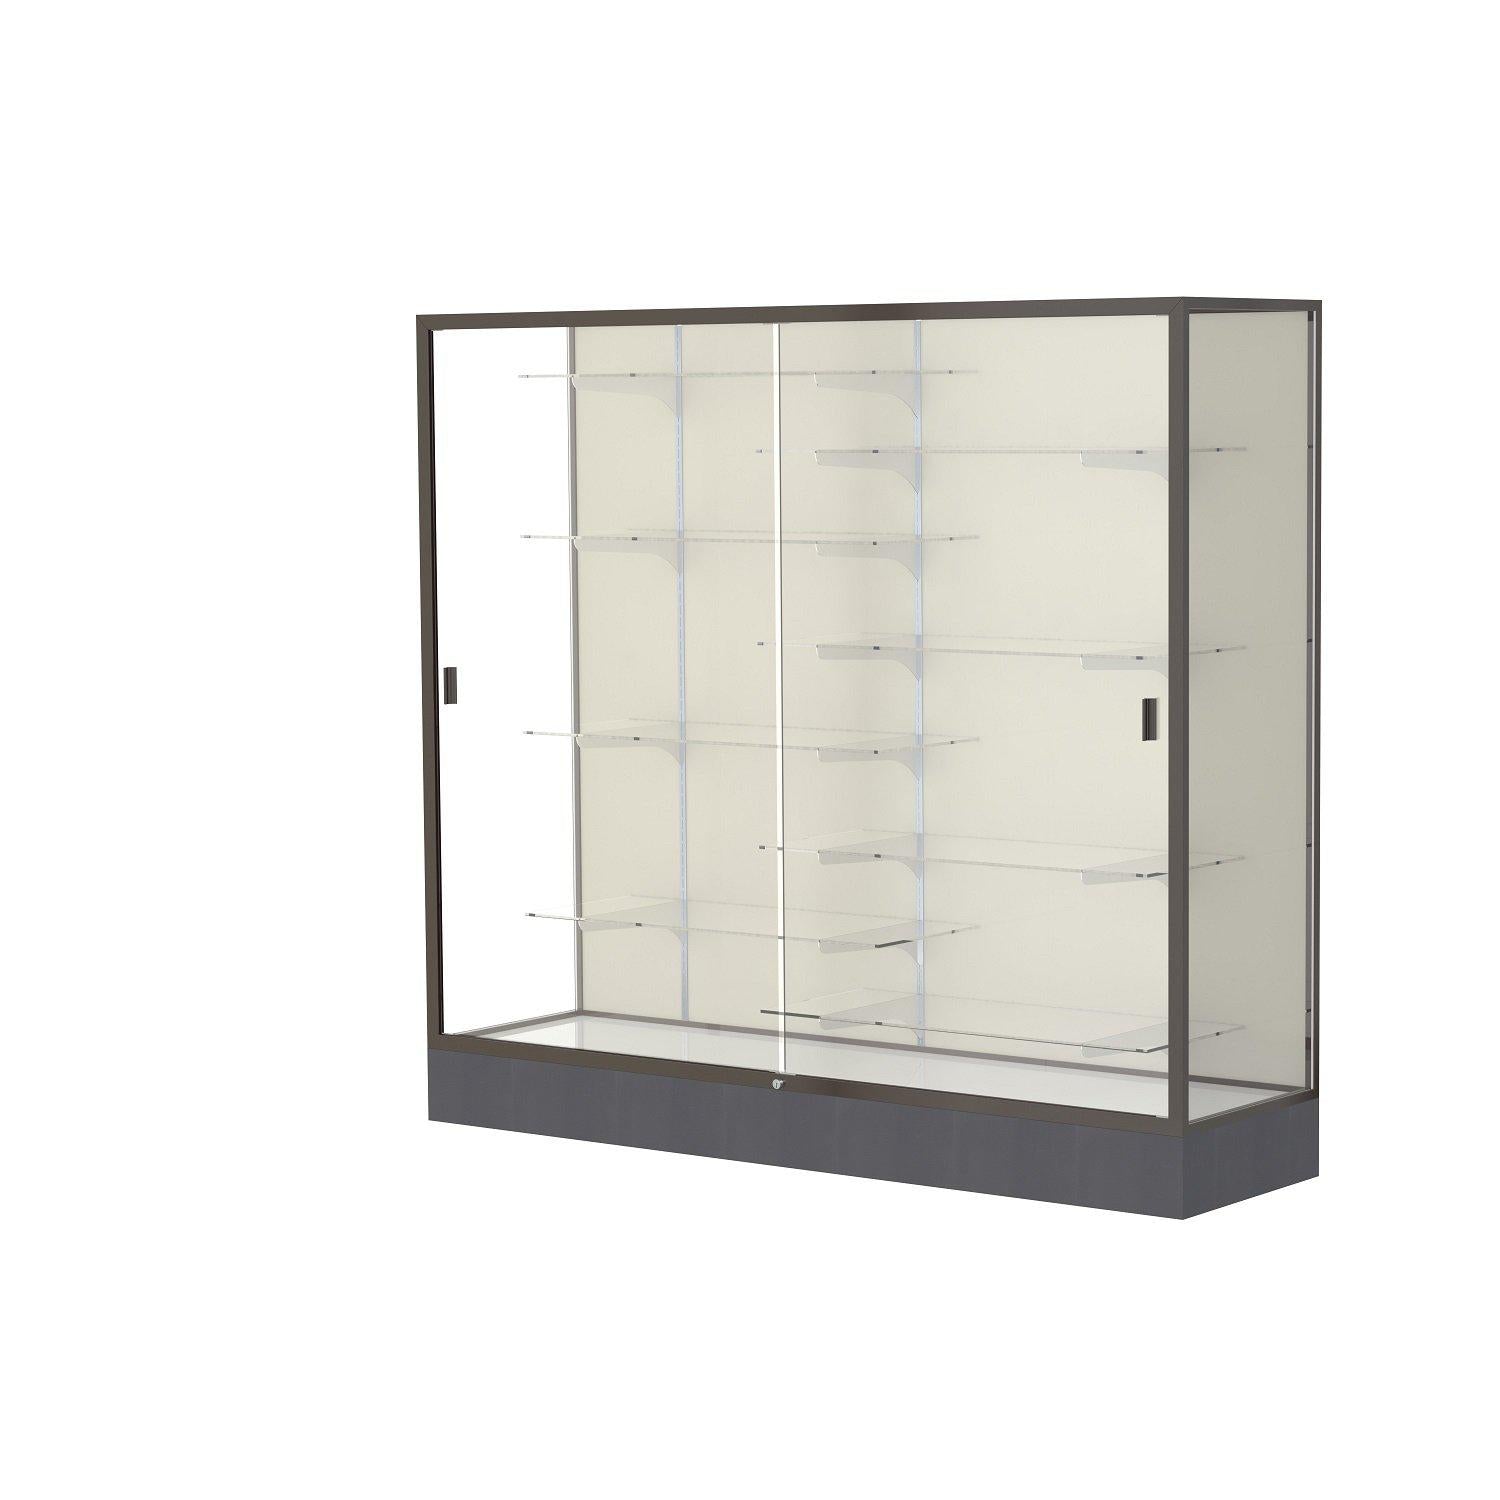 Colossus Series Floor Display Case, 72"W x 66"H x 20"D